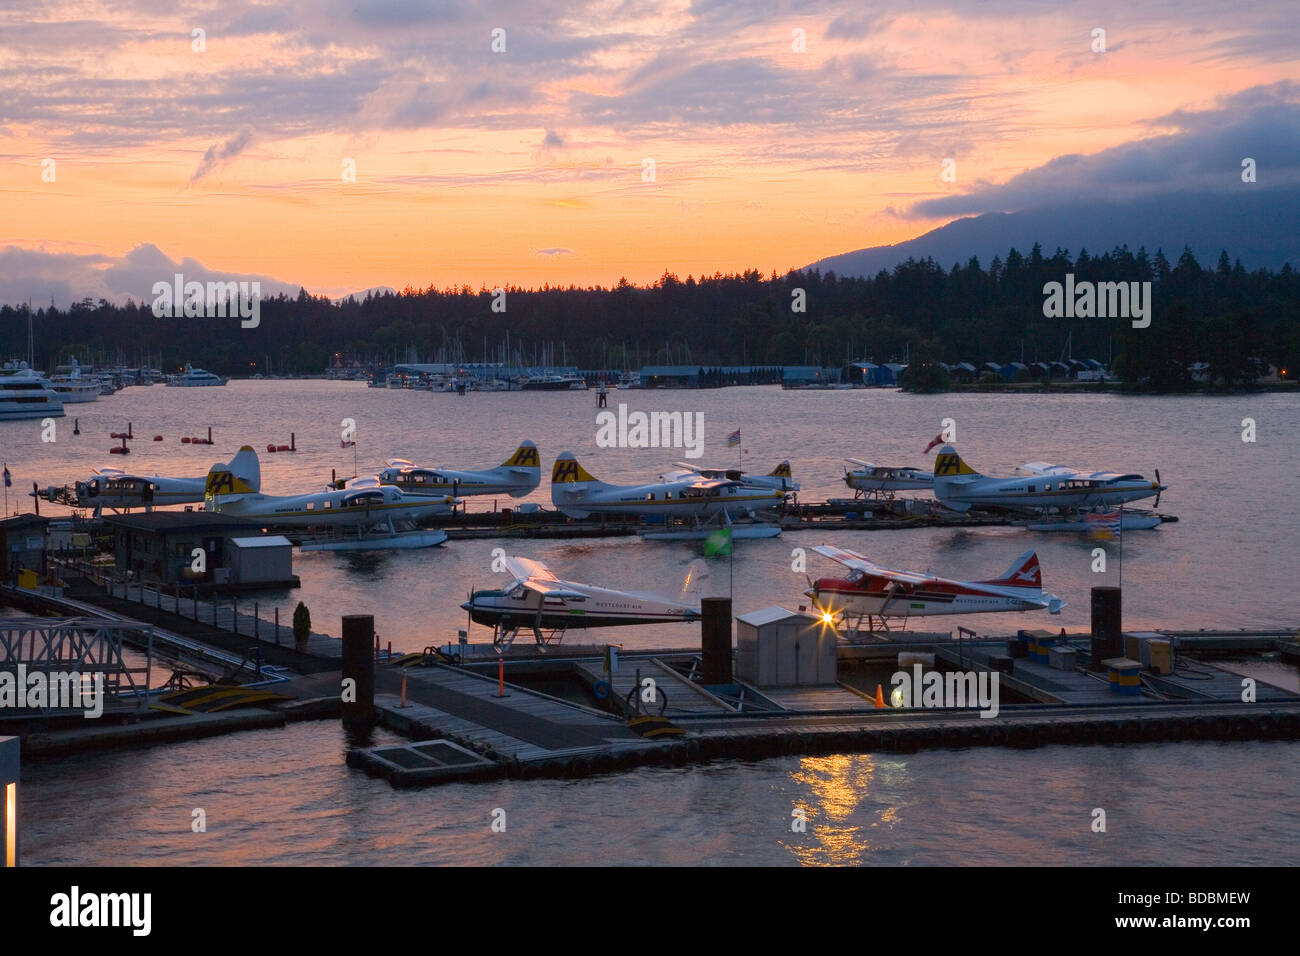 Sunset on seaplanes in Vancouver harbour, British Columbia, Canada Stock Photo